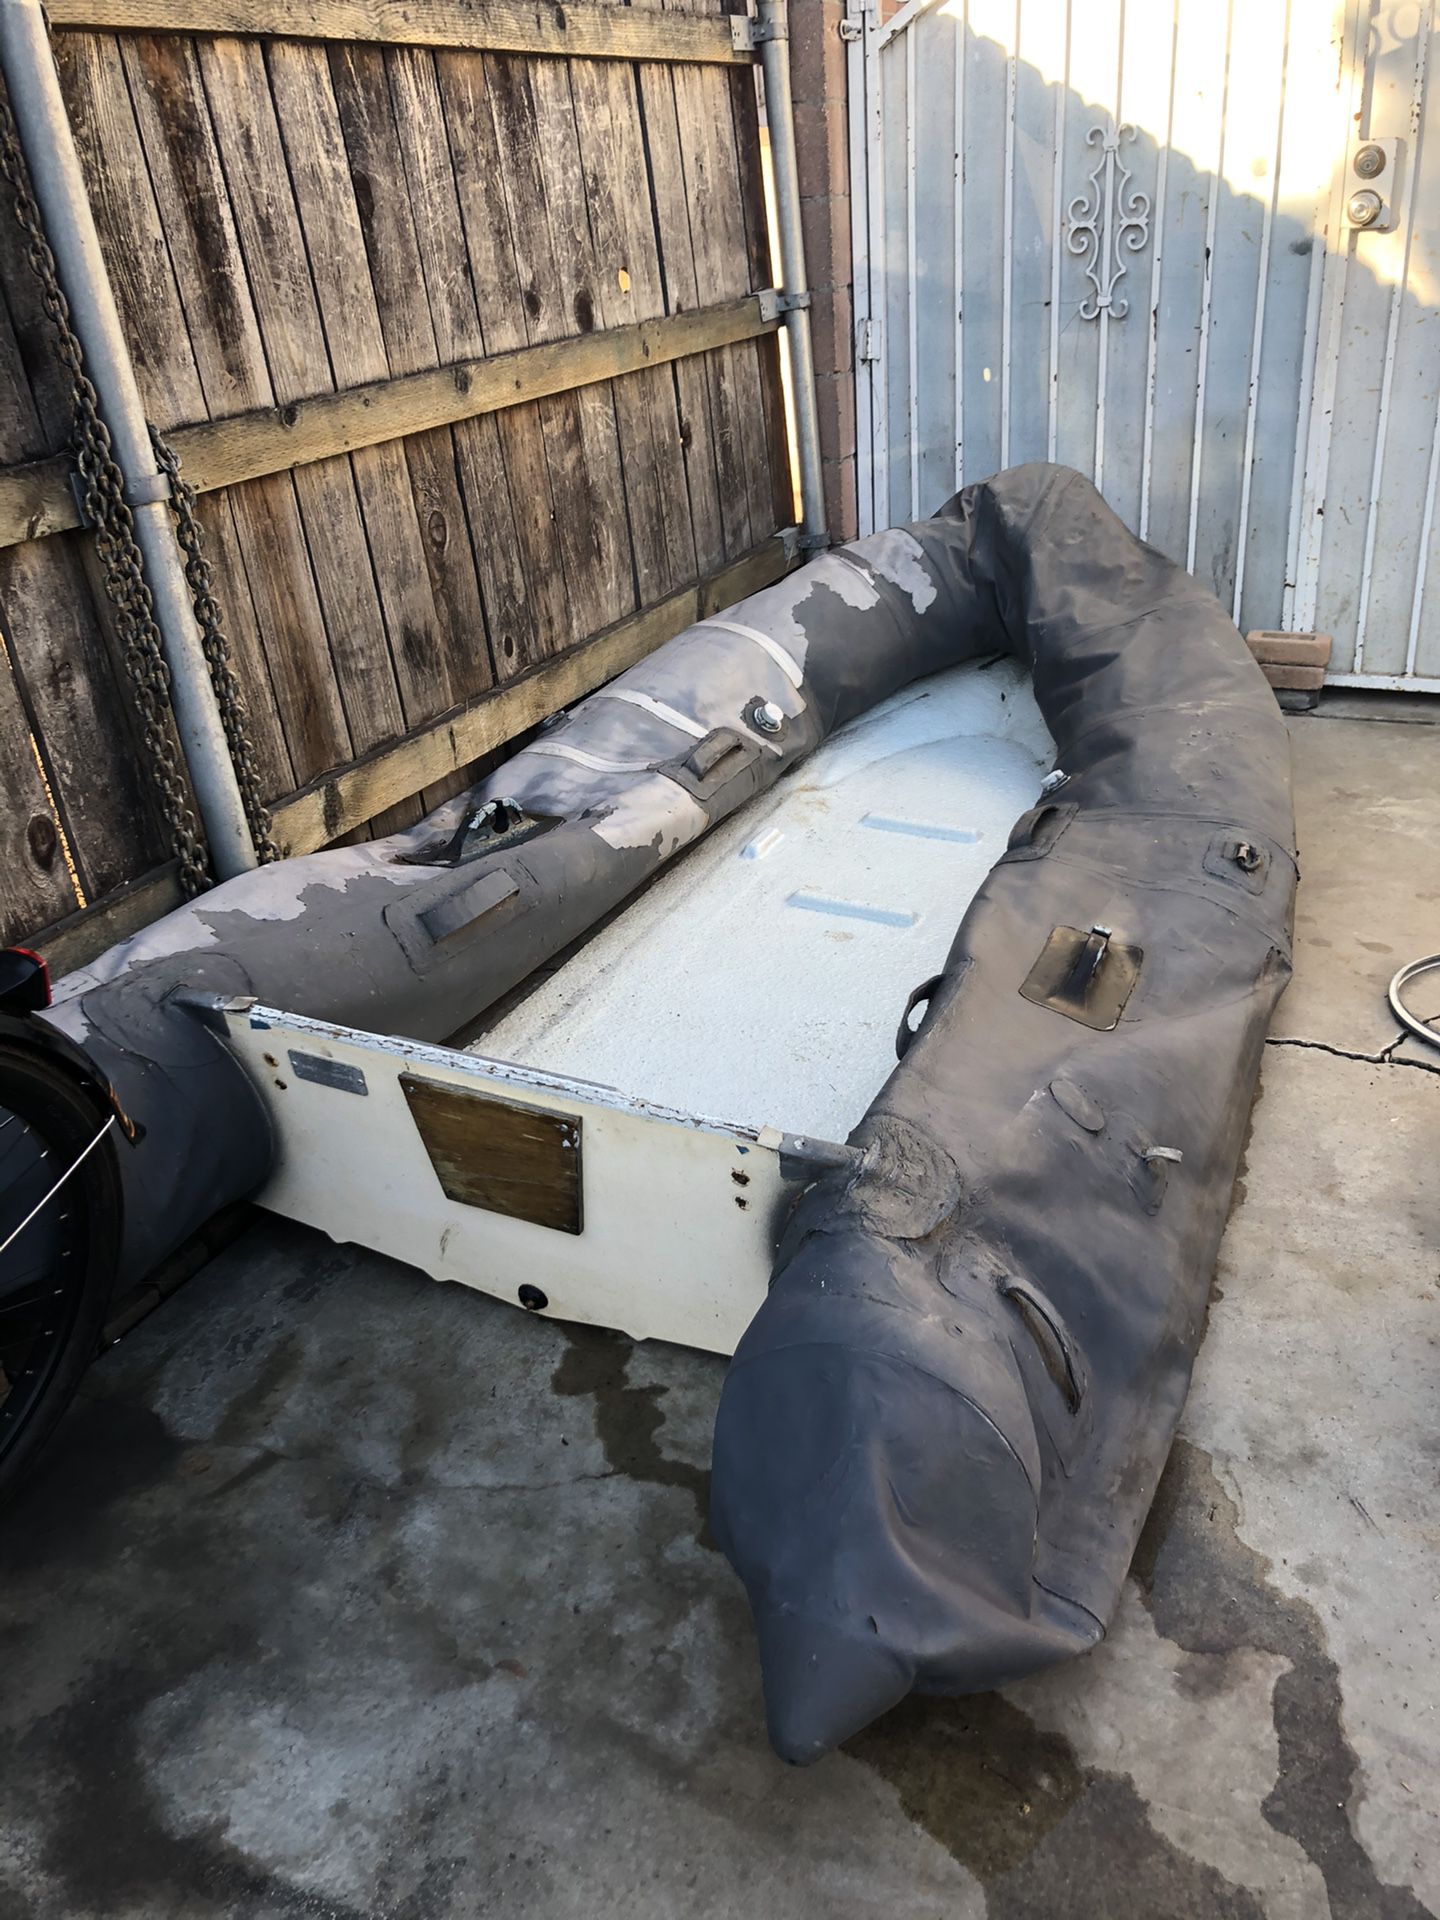 Avon inflatable boat ready to be restored holds air $35.00